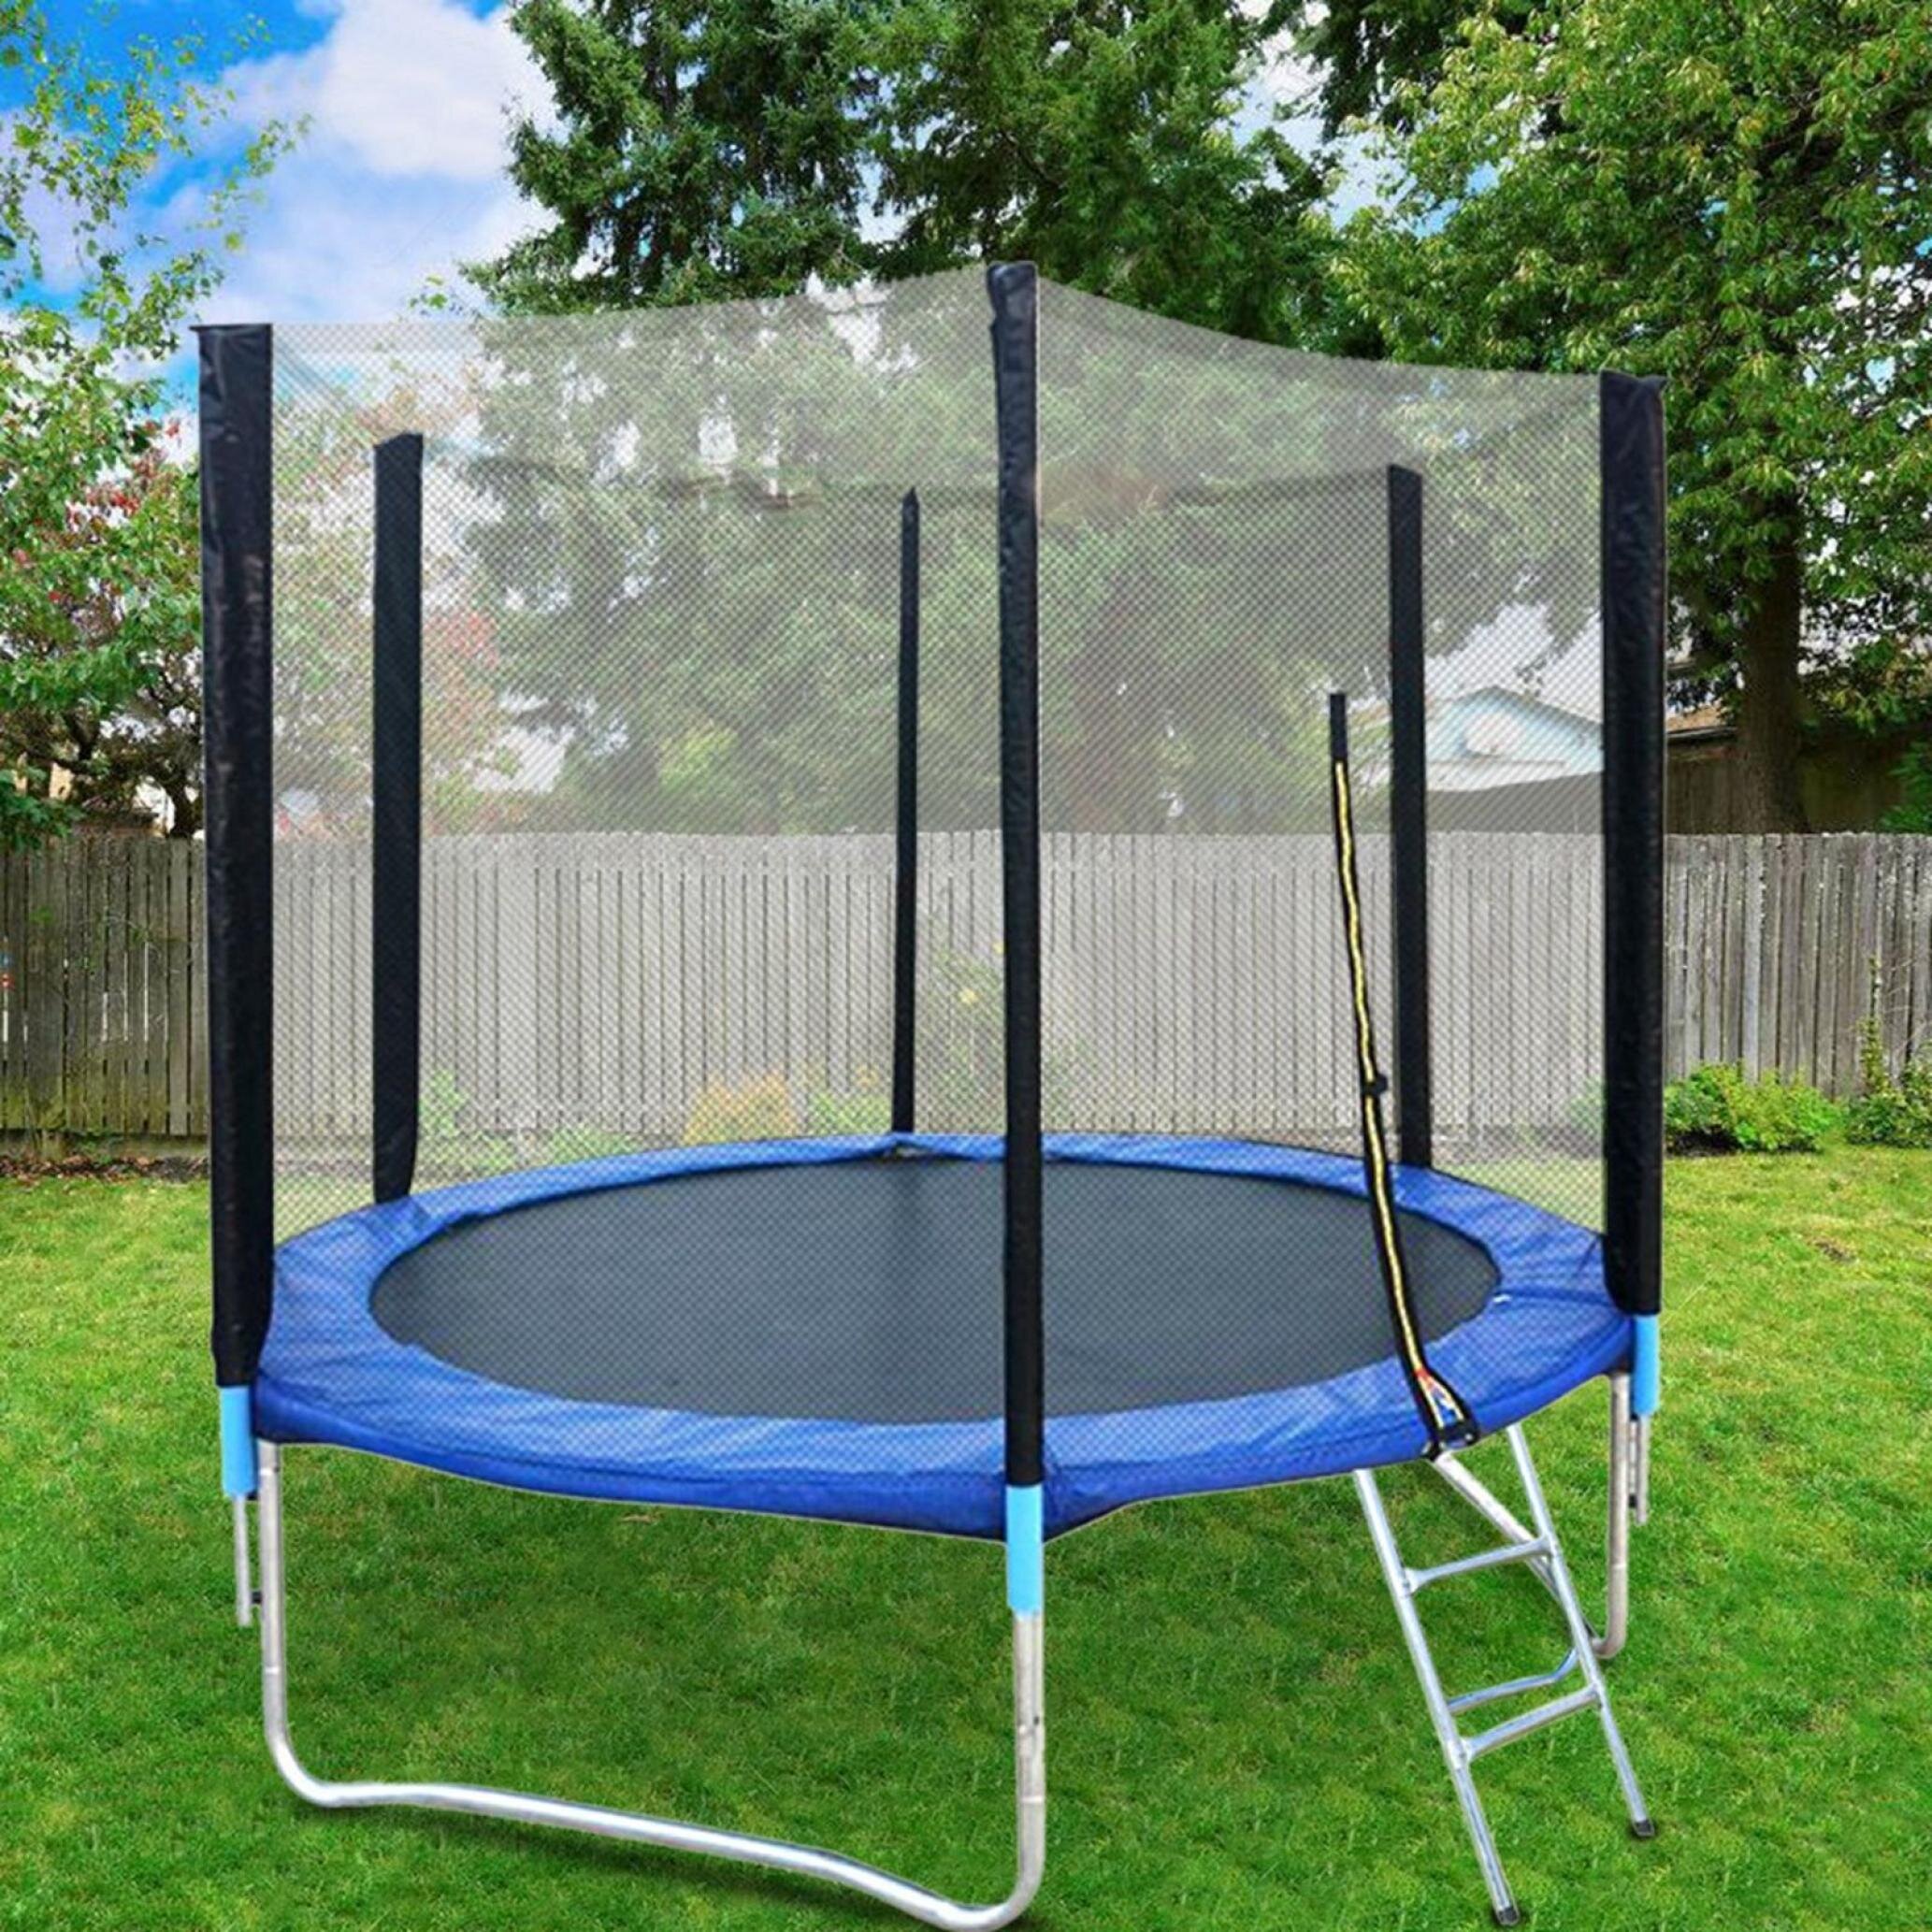 Details about   12 FT Trampoline With Enclosure Net Jumping Mat And Spring Cover Padding 